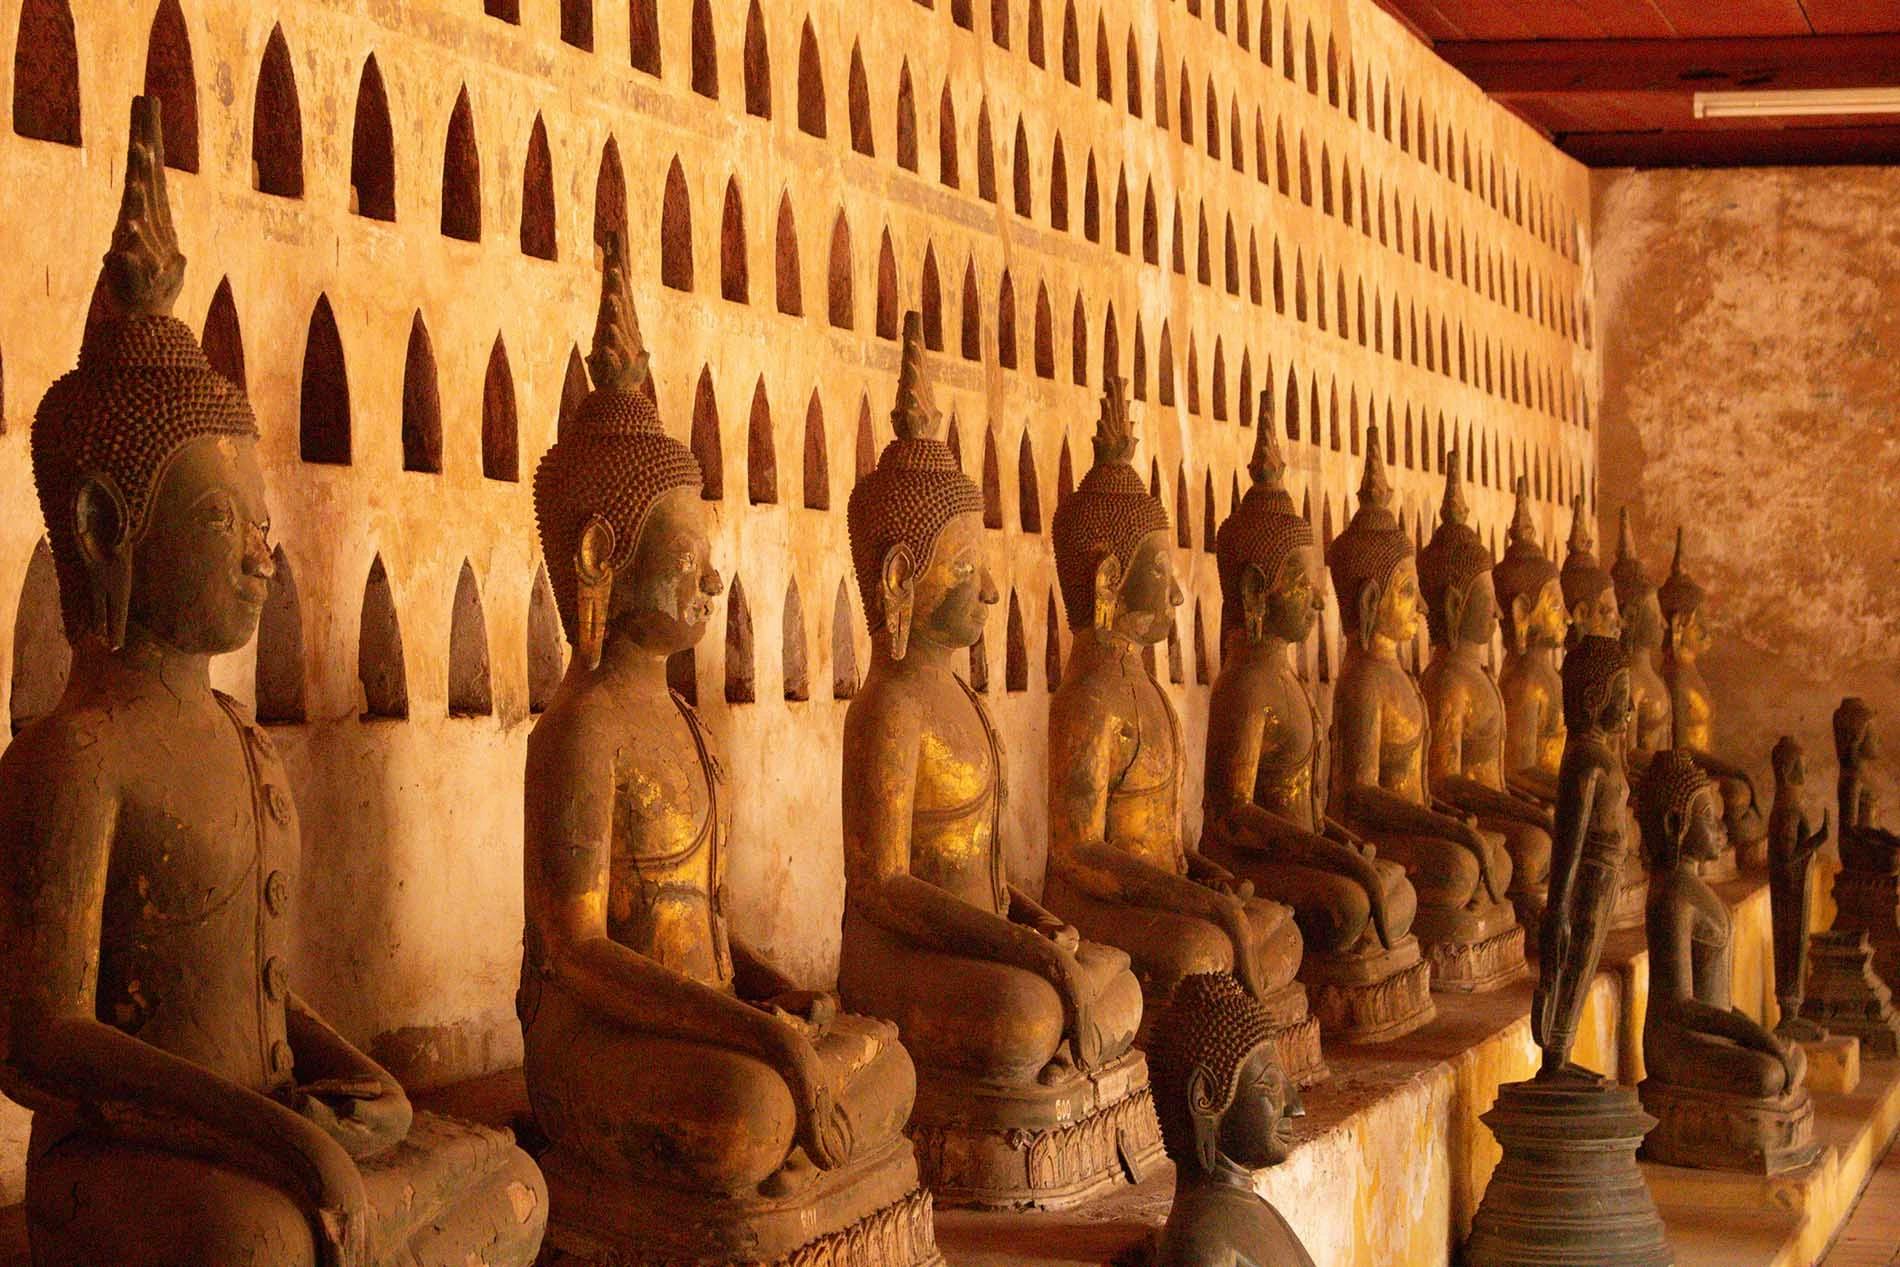 Picture in prospective of some Buddha statues in a temple in Vientiane, Laos. The statues represent Buddha is a seated position and they are all of an orange to brownish color. The wall behind the statues has a lot of "holes" containing smaller Buddha  statues, which are not visible in this picture. On a lower level there are some smaller, bronze statues of Buddha in different poses.